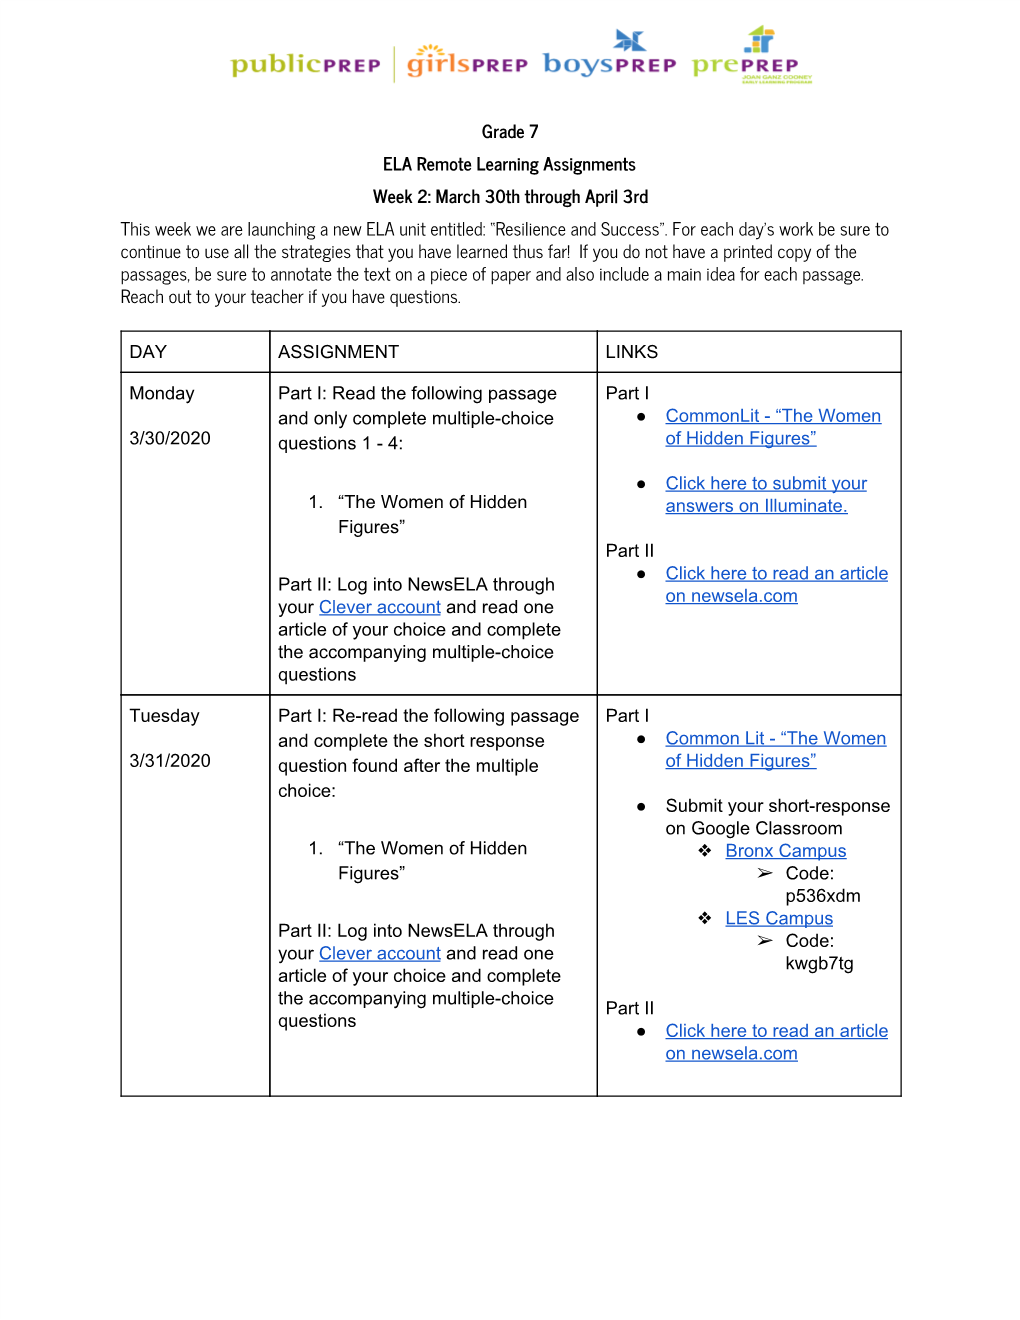 Grade 7 ELA Remote Learning Assignments Week 2: March 30Th Through April 3Rd This Week We Are Launching a New ELA Unit Entitled: “Resilience and Success”